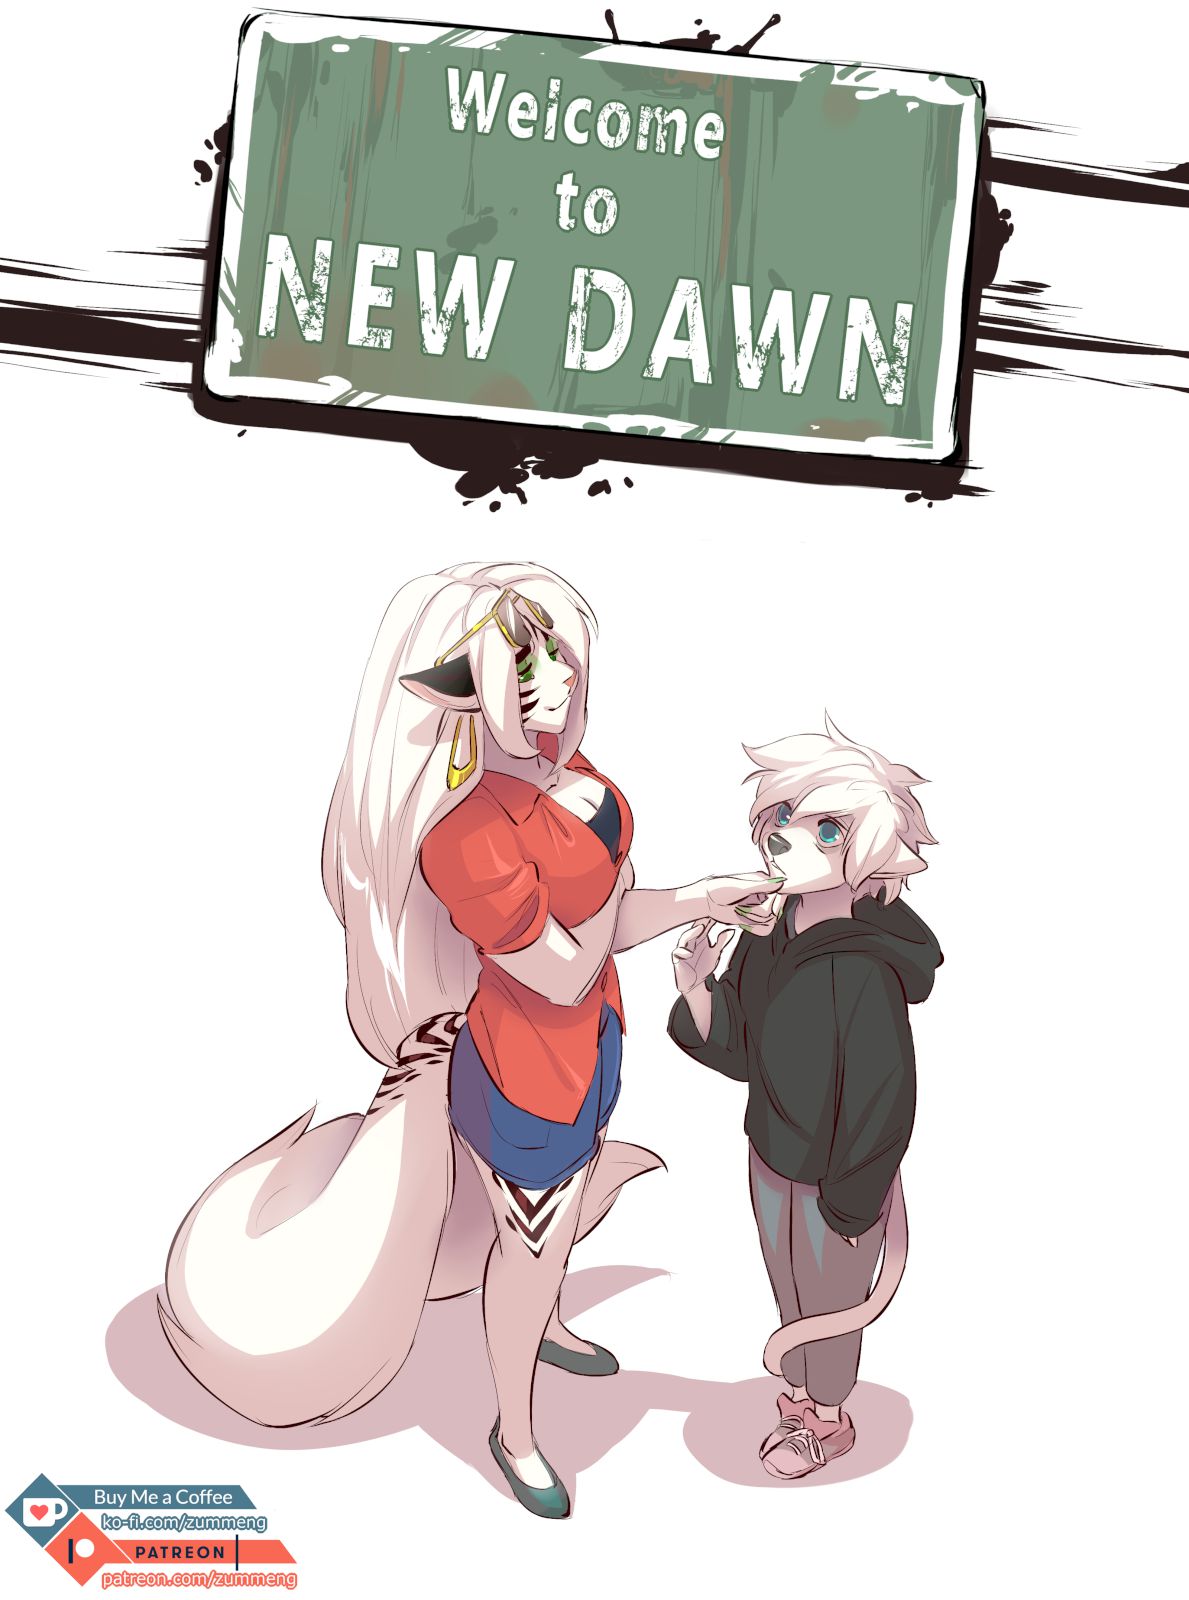 [Zummeng] Welcome to New Dawn [English] (Ongoing) 25